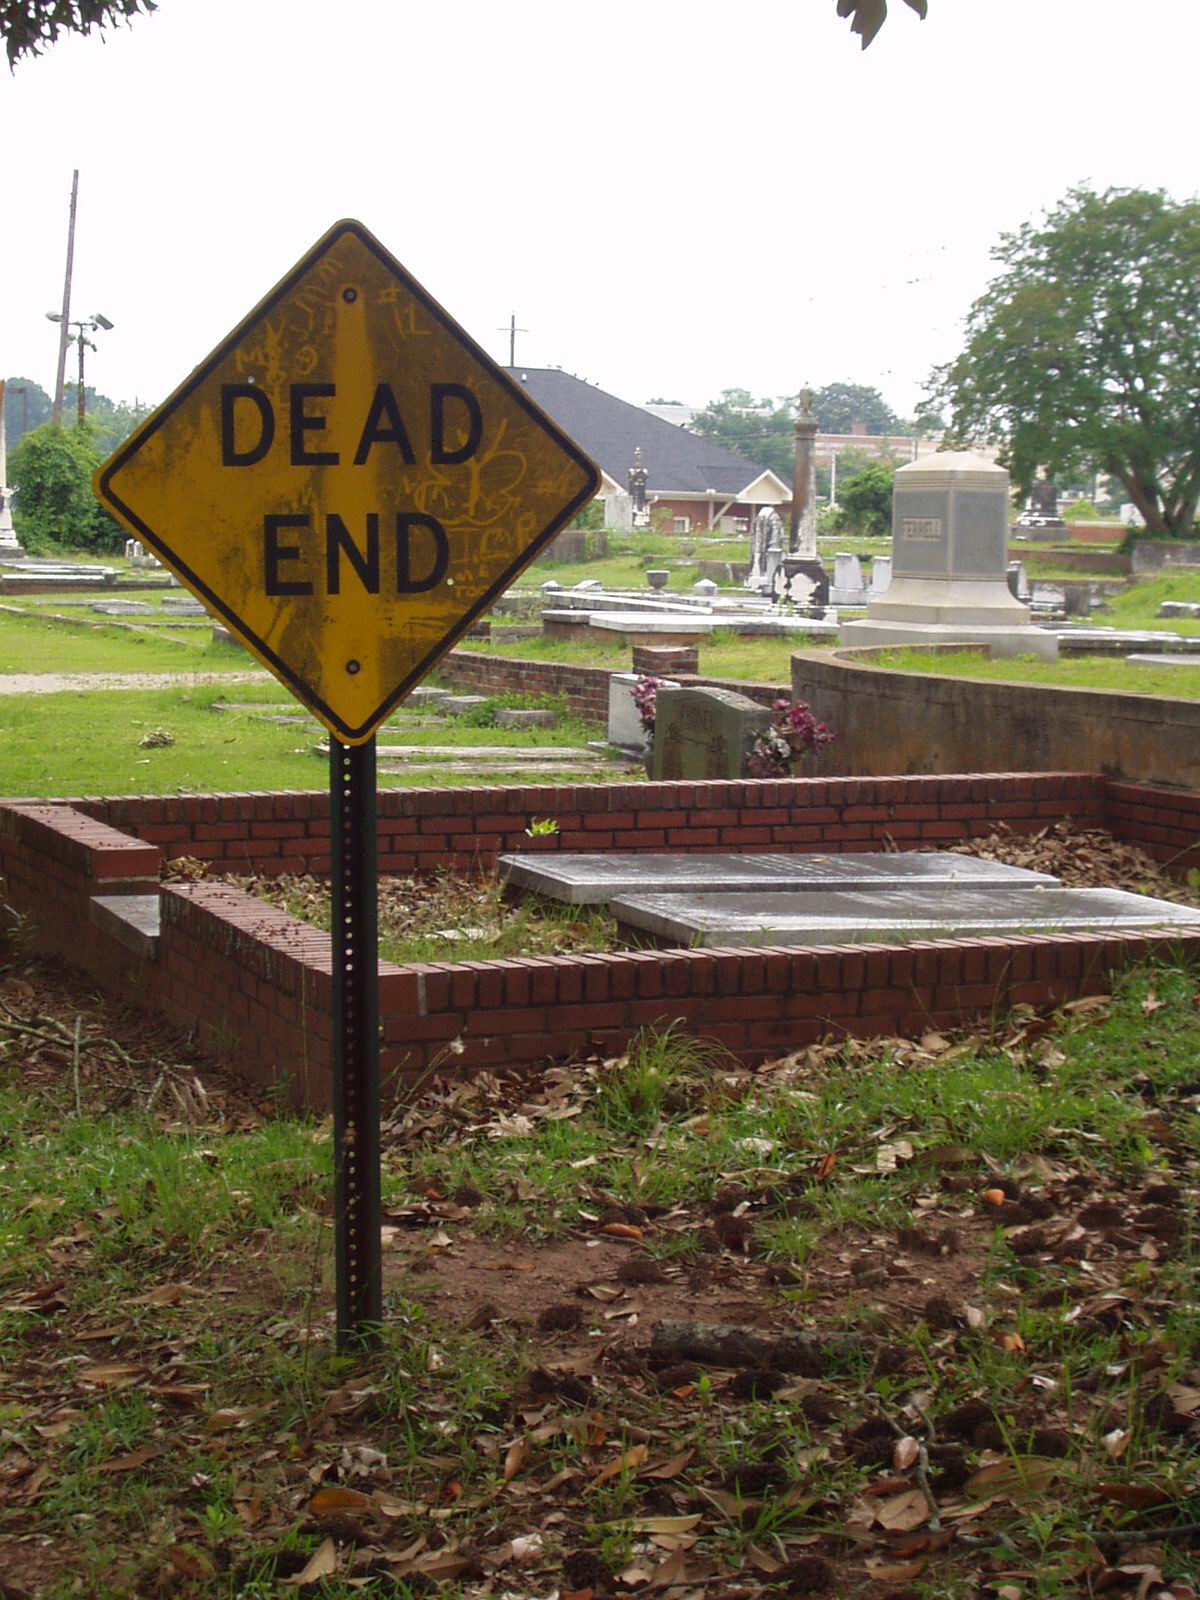 A photograph of a Dead End sign on a street which is located next to a cemetery.